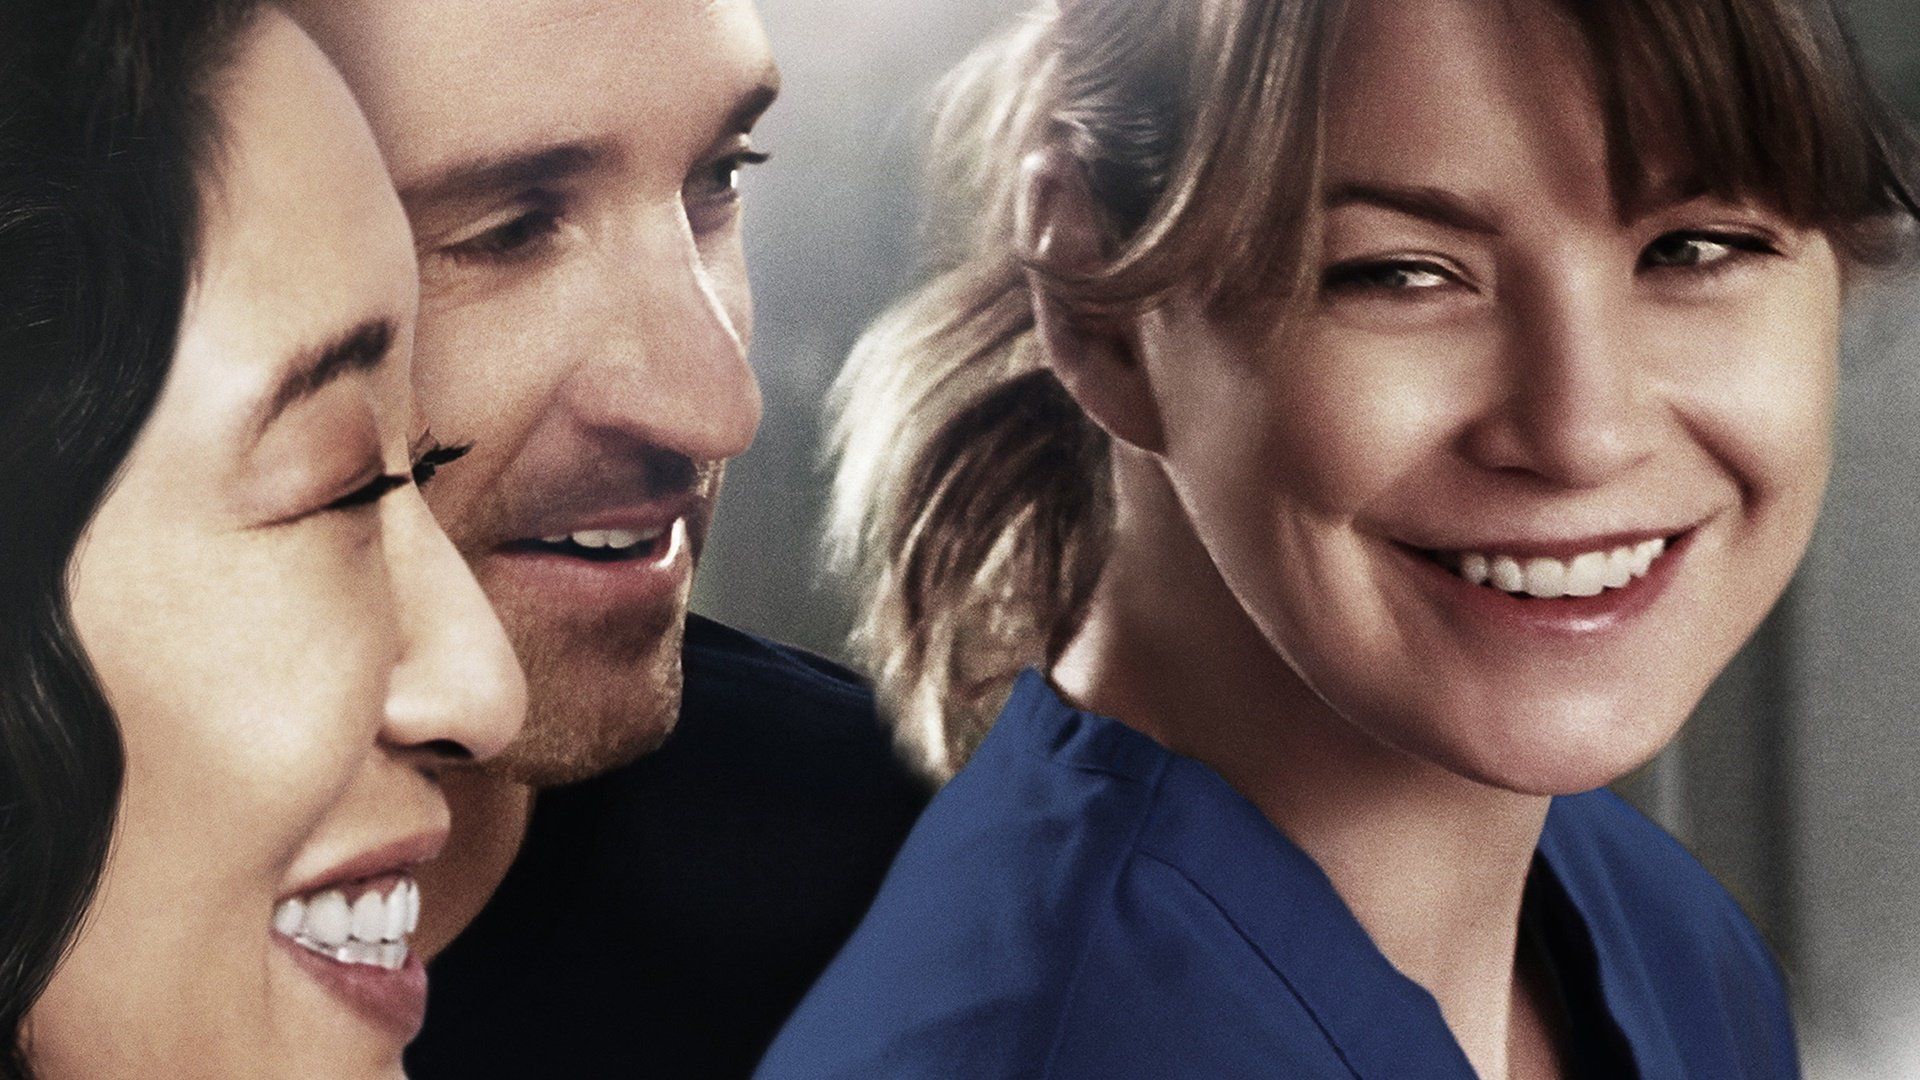 Mobile wallpaper: Tv Show, Grey's Anatomy, 941014 download the picture for free